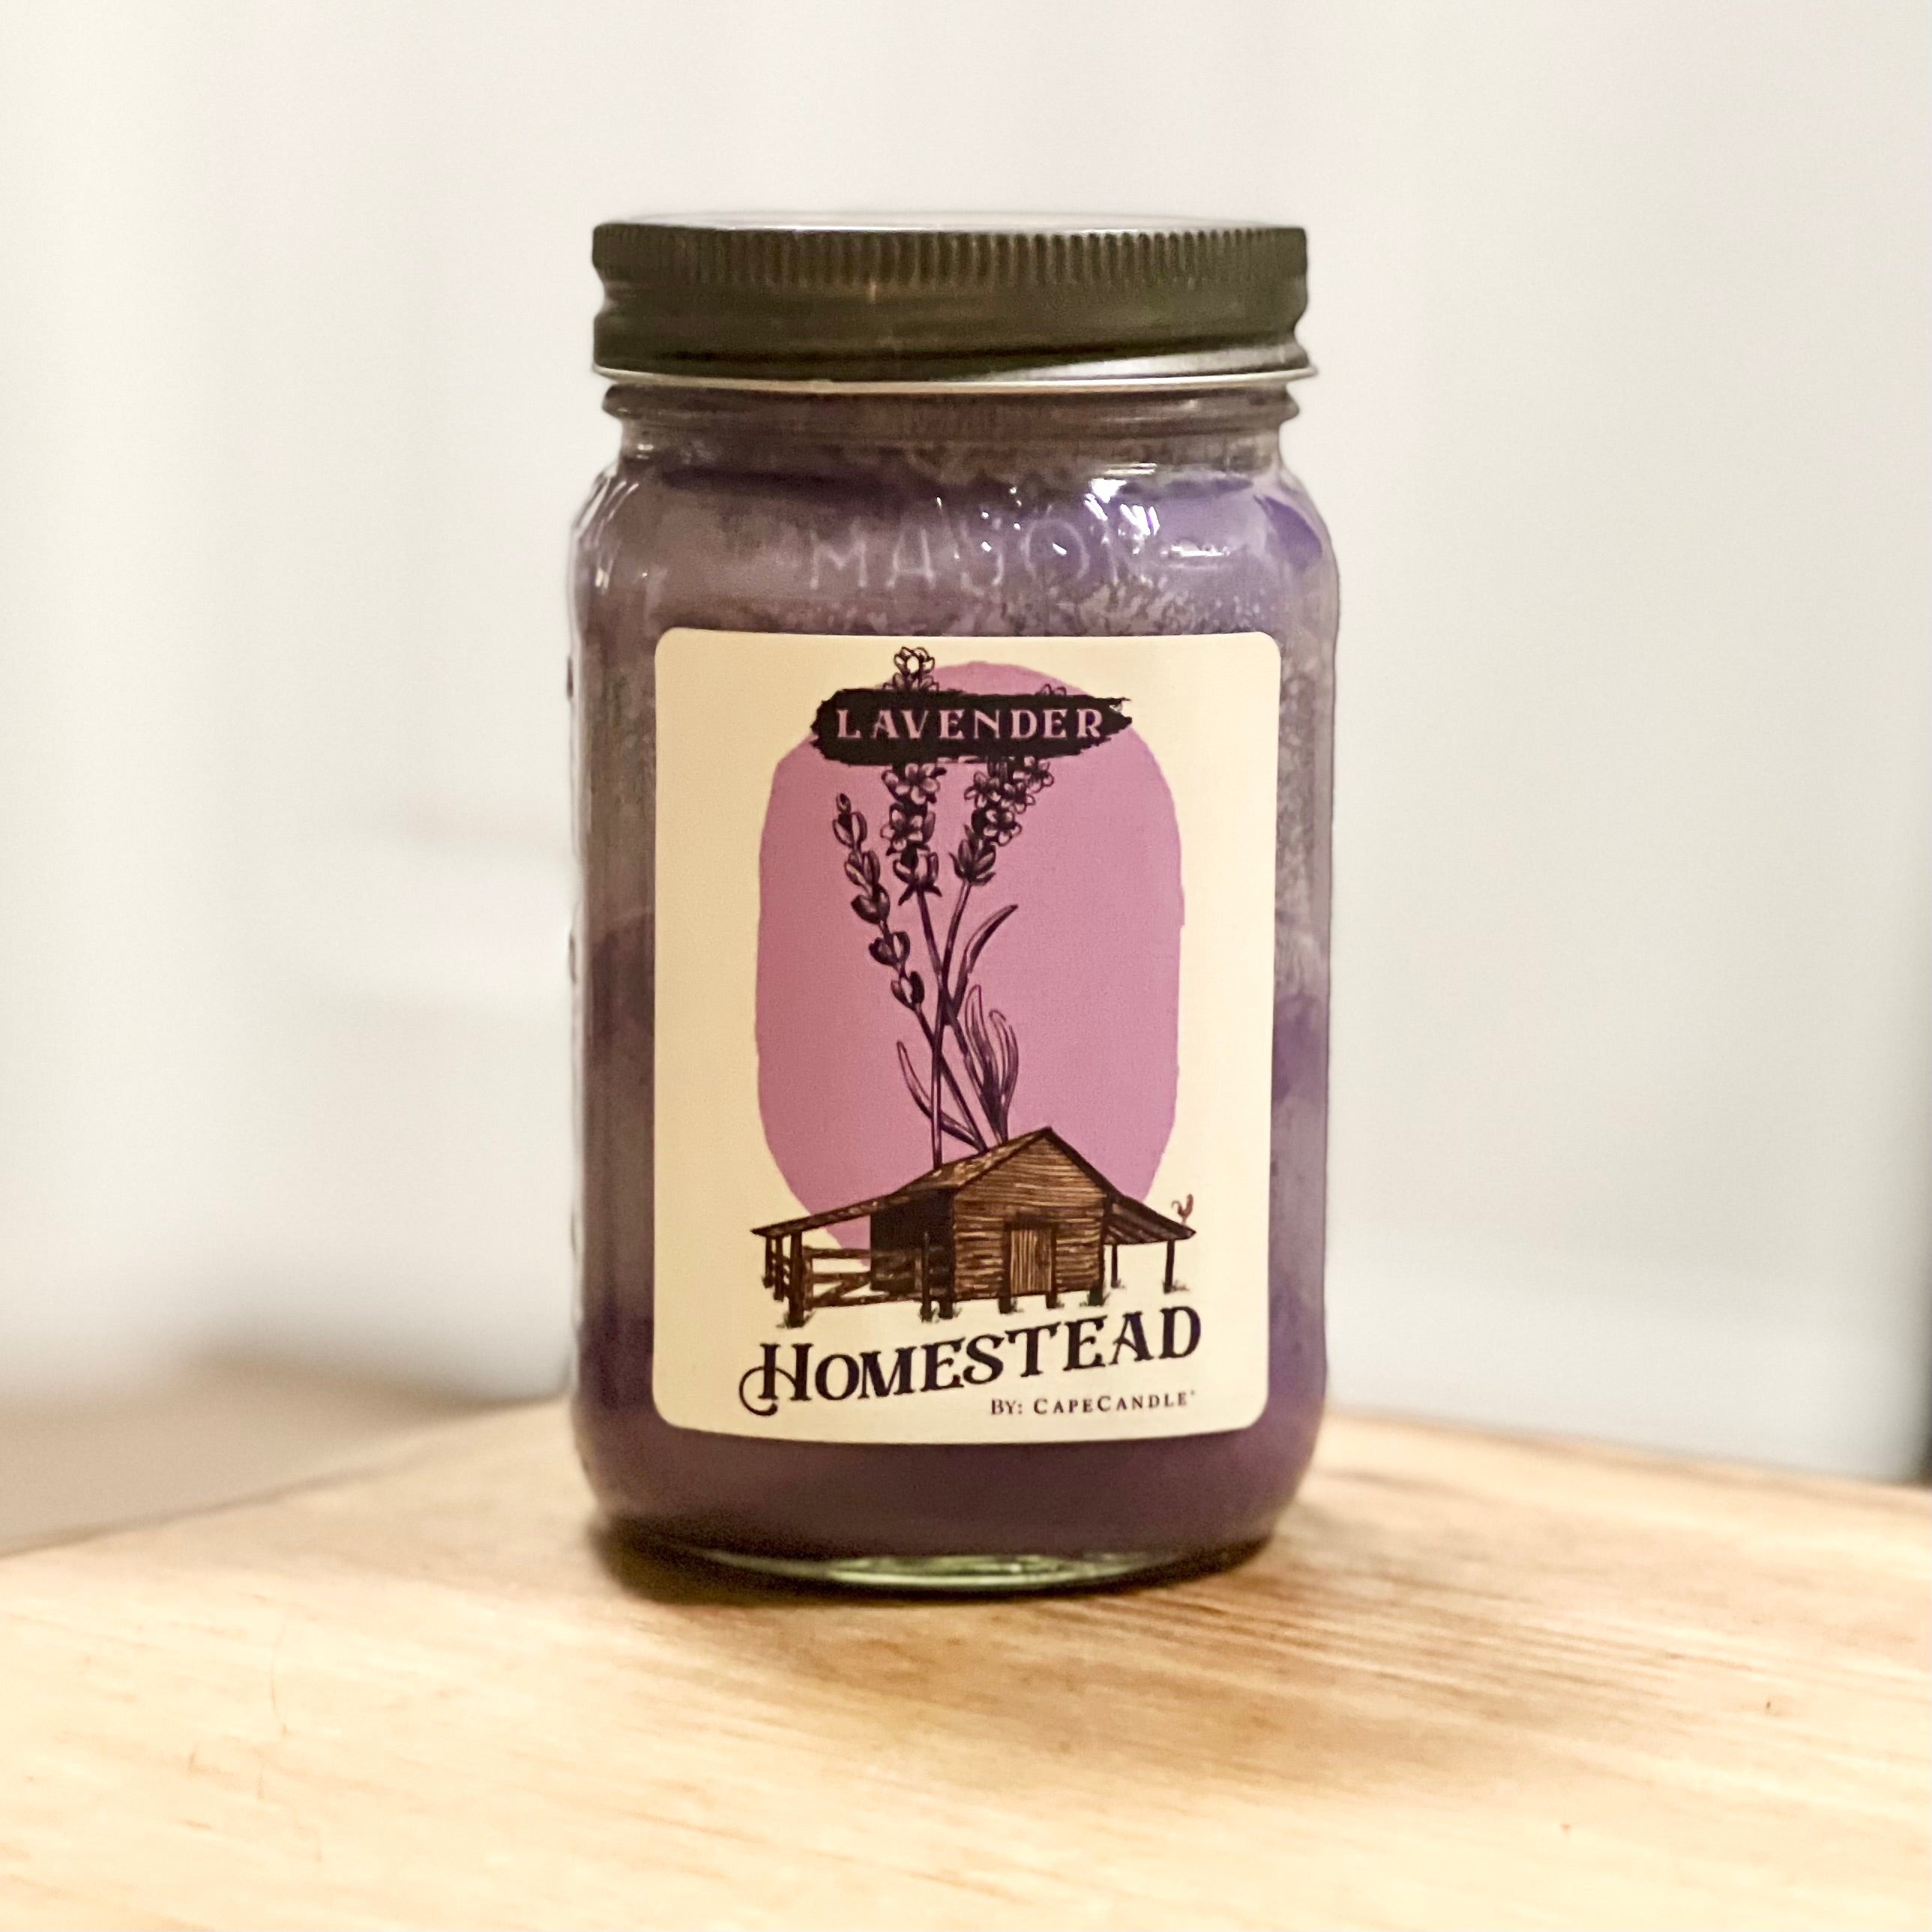 Lavender Soy Candle 16oz Homestead Mason Jar by Cape Candle